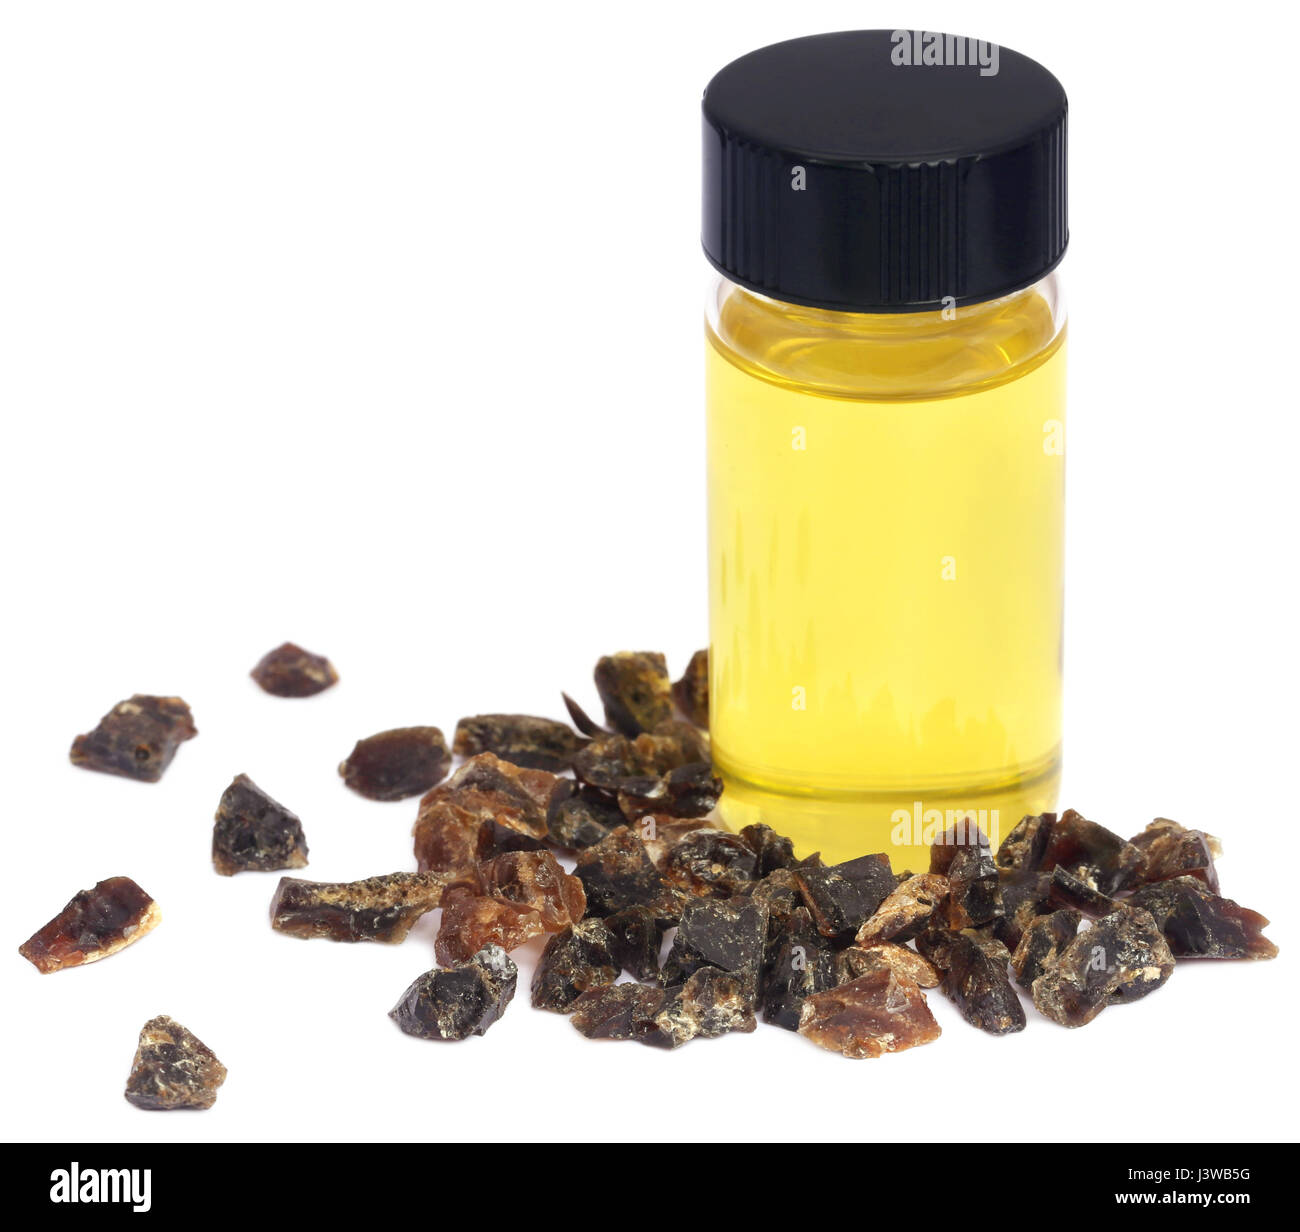 Frankincense dhoop, a natural aromatic resin used in perfumes and incenses with essential oil Stock Photo